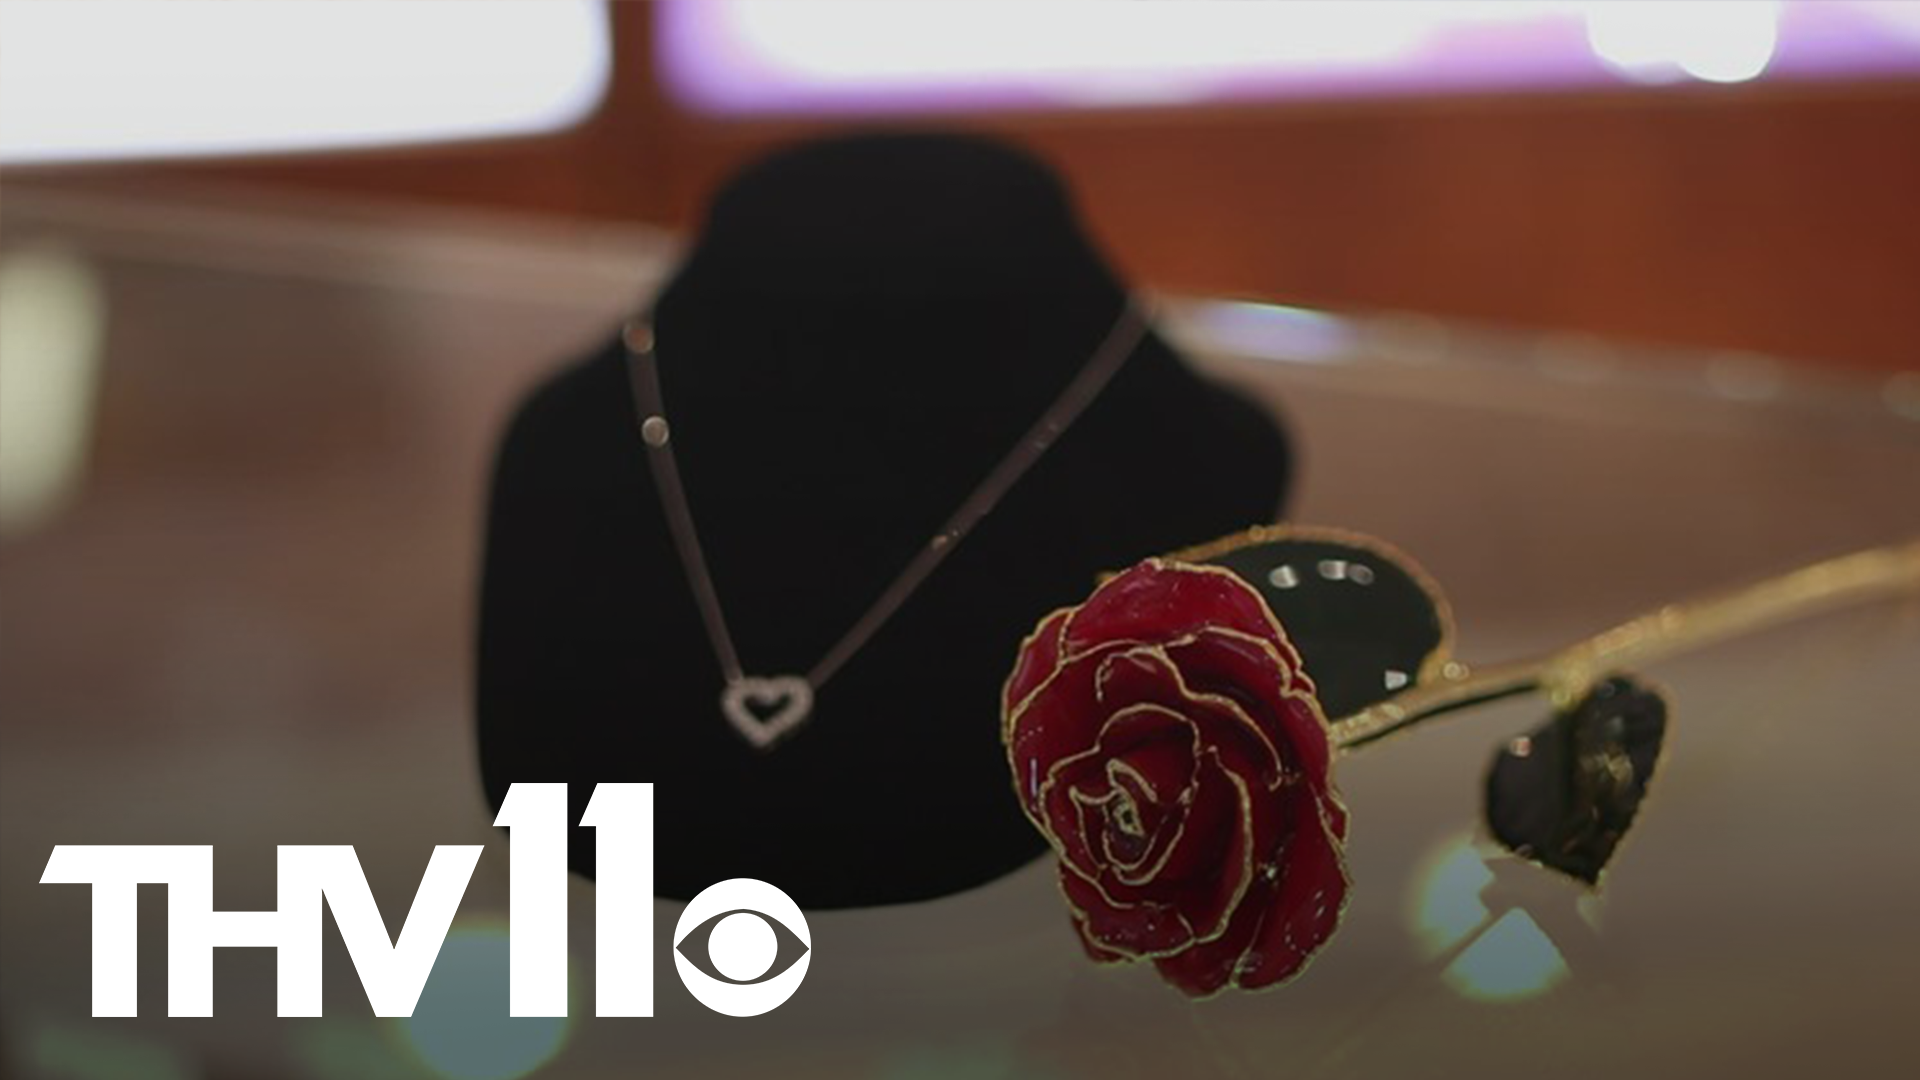 It's a holiday that's filled with flowers, chocolates, and showing those you love that you care. For some local businesses, Valentine's Day is also filled with hope.